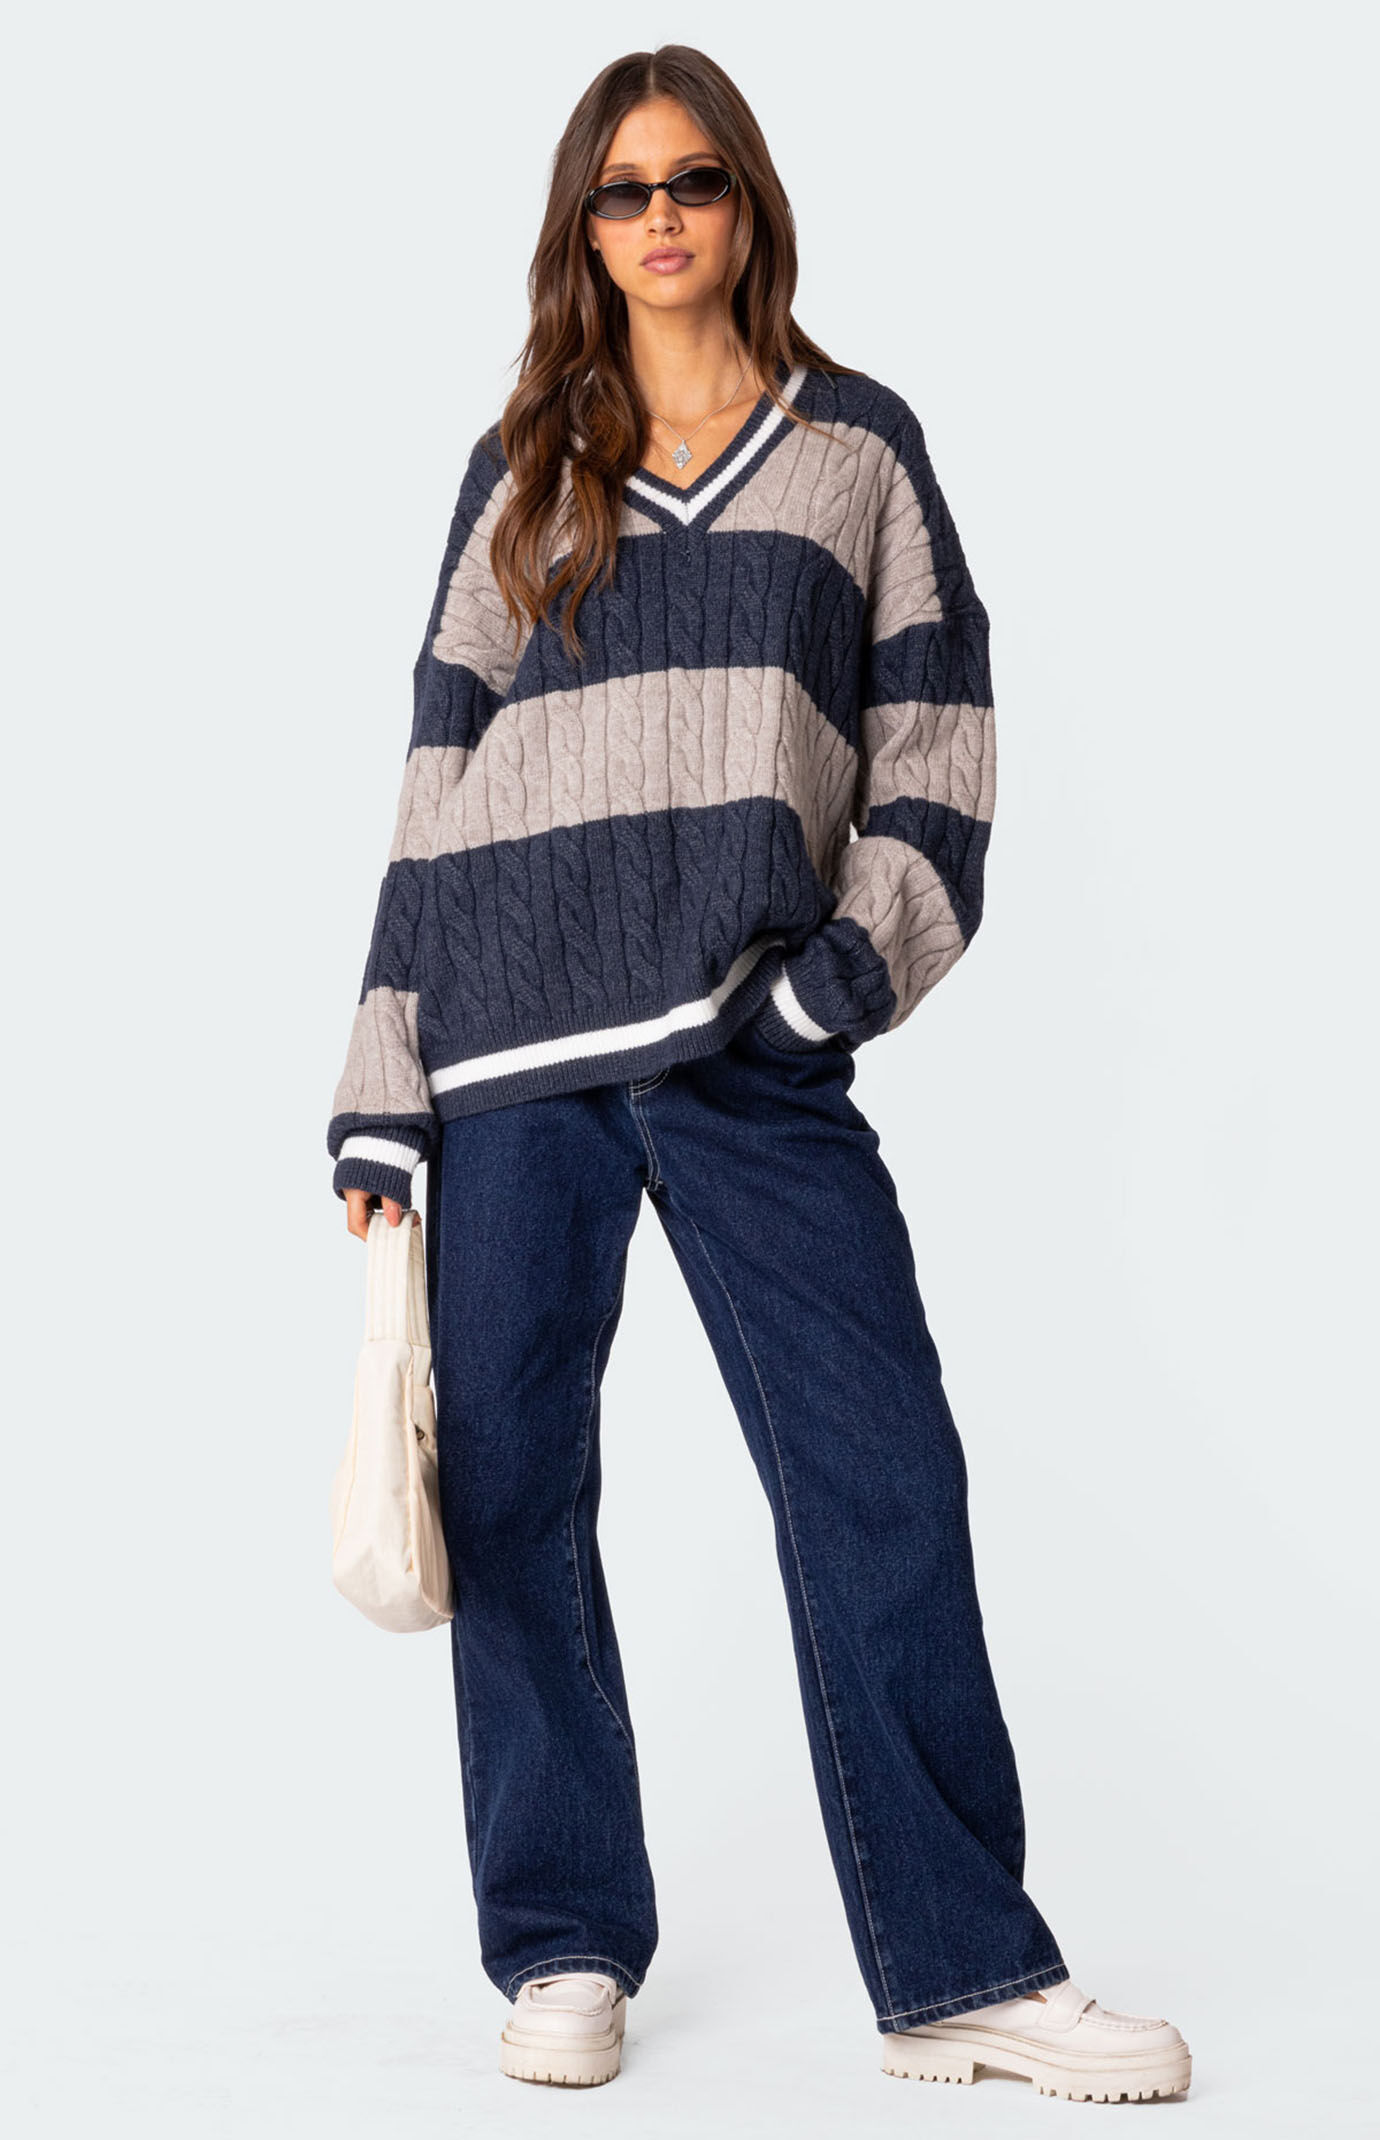 Romie V-Neck Cable Knit Sweater